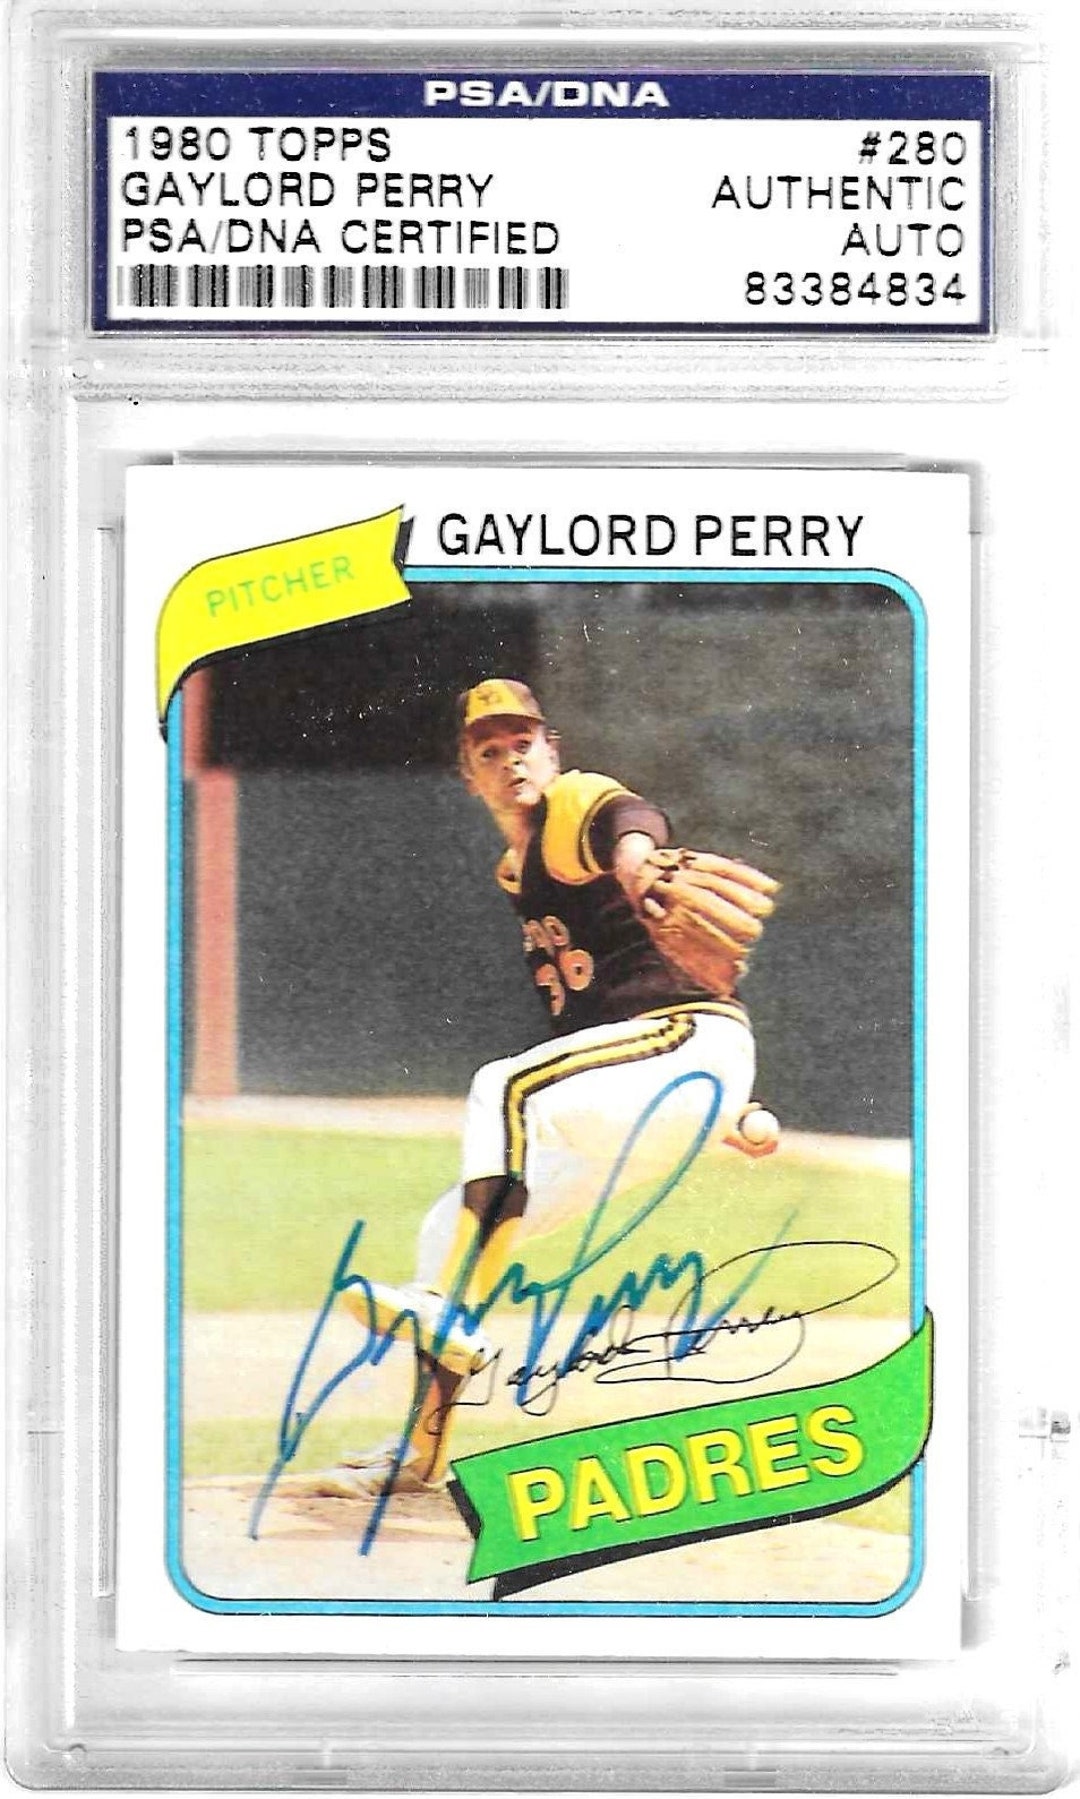 Gaylord Perry Hall of Fame Signed 1980 Topps Card 280 